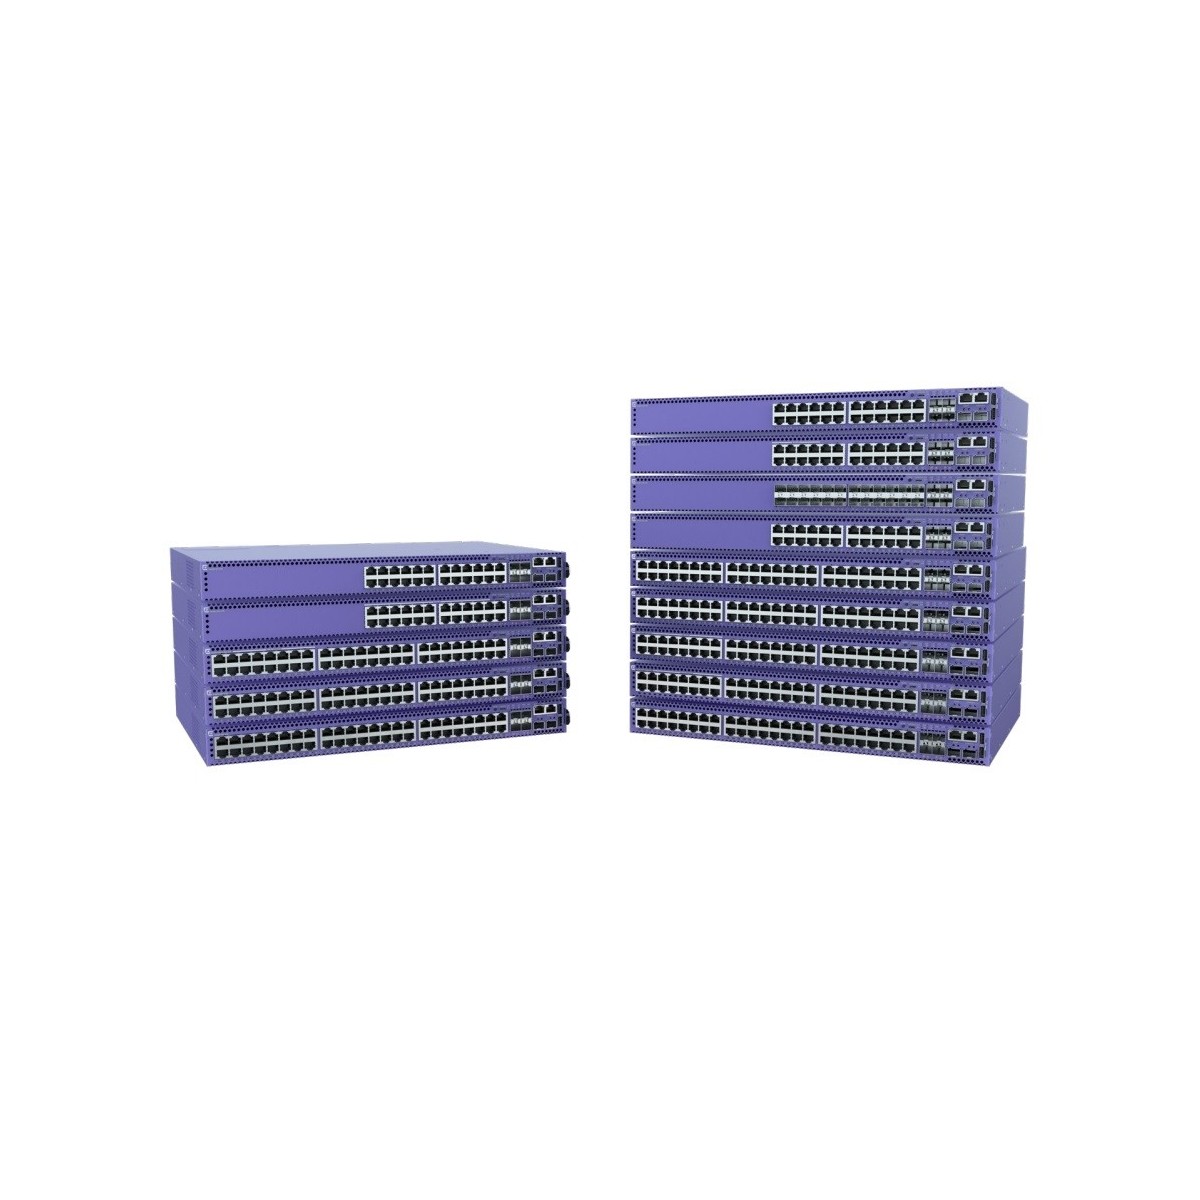 Extreme Networks ExtremeSwitching 5420F 48 - Switch - 1 Gbps